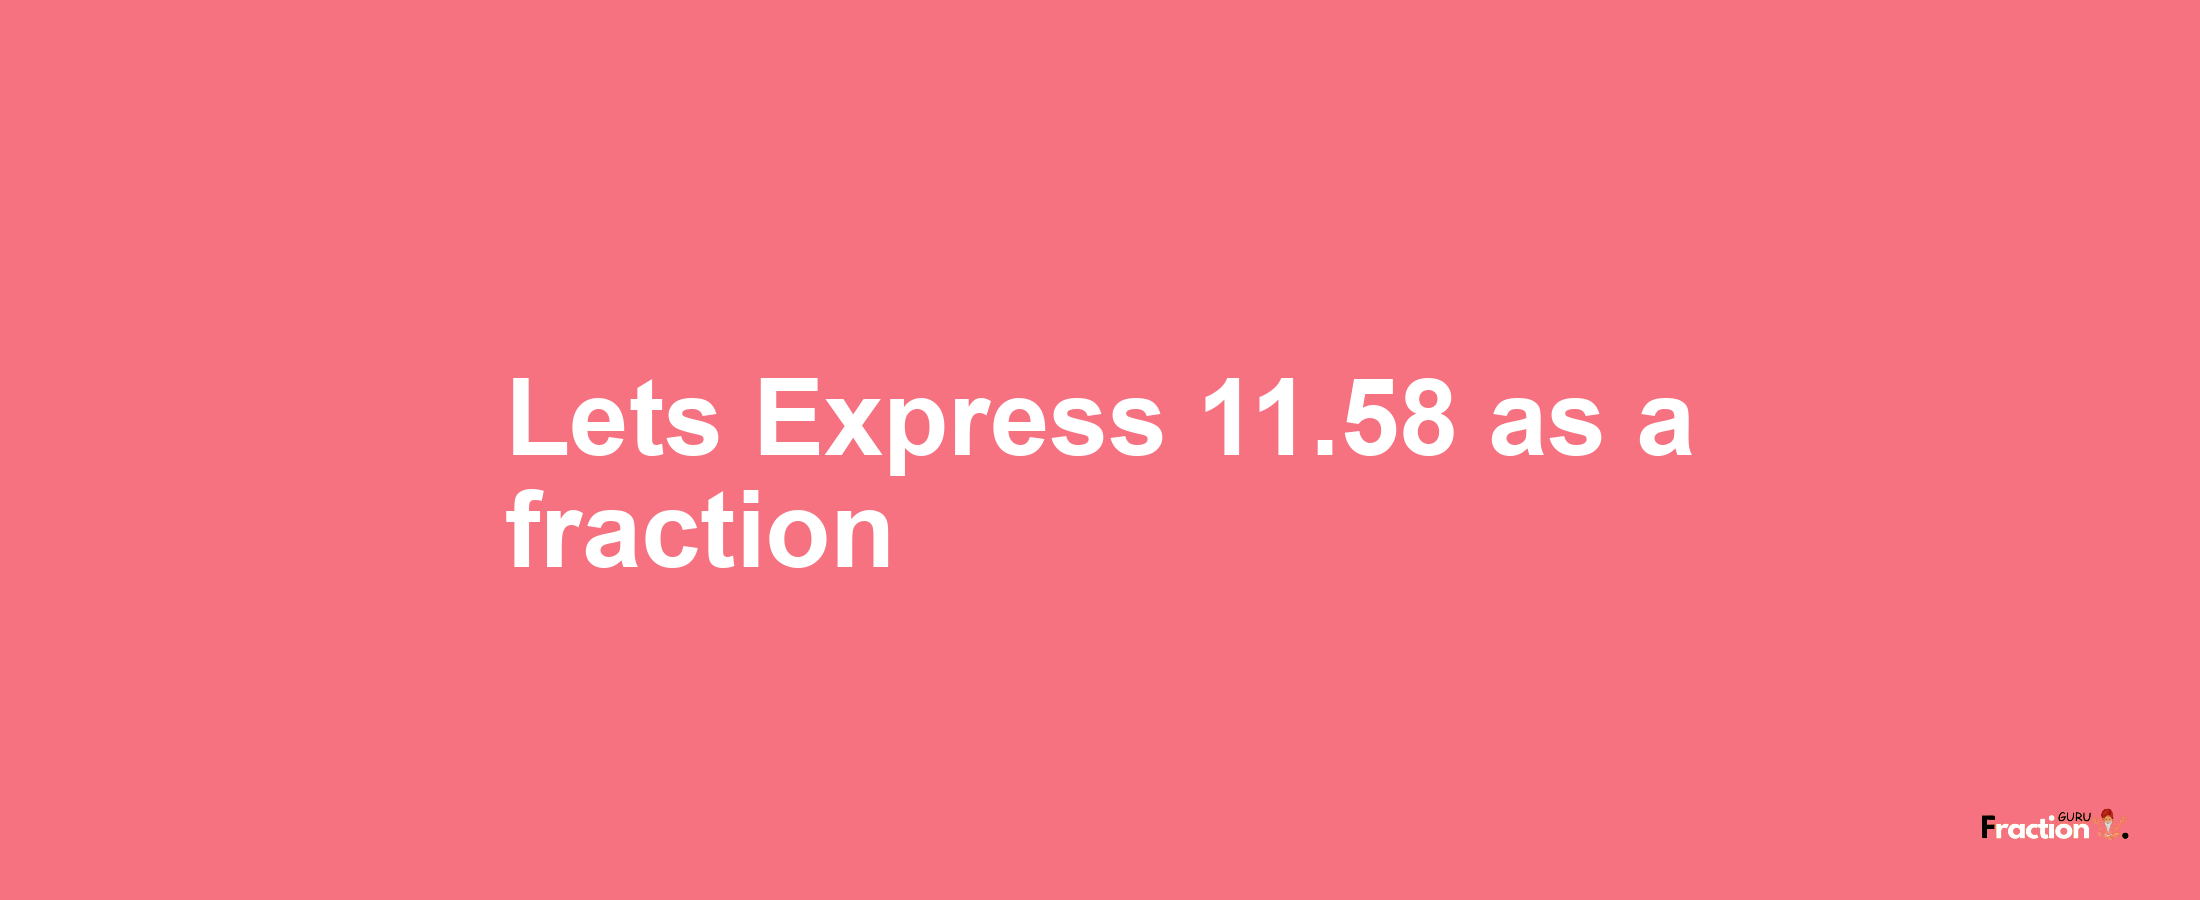 Lets Express 11.58 as afraction